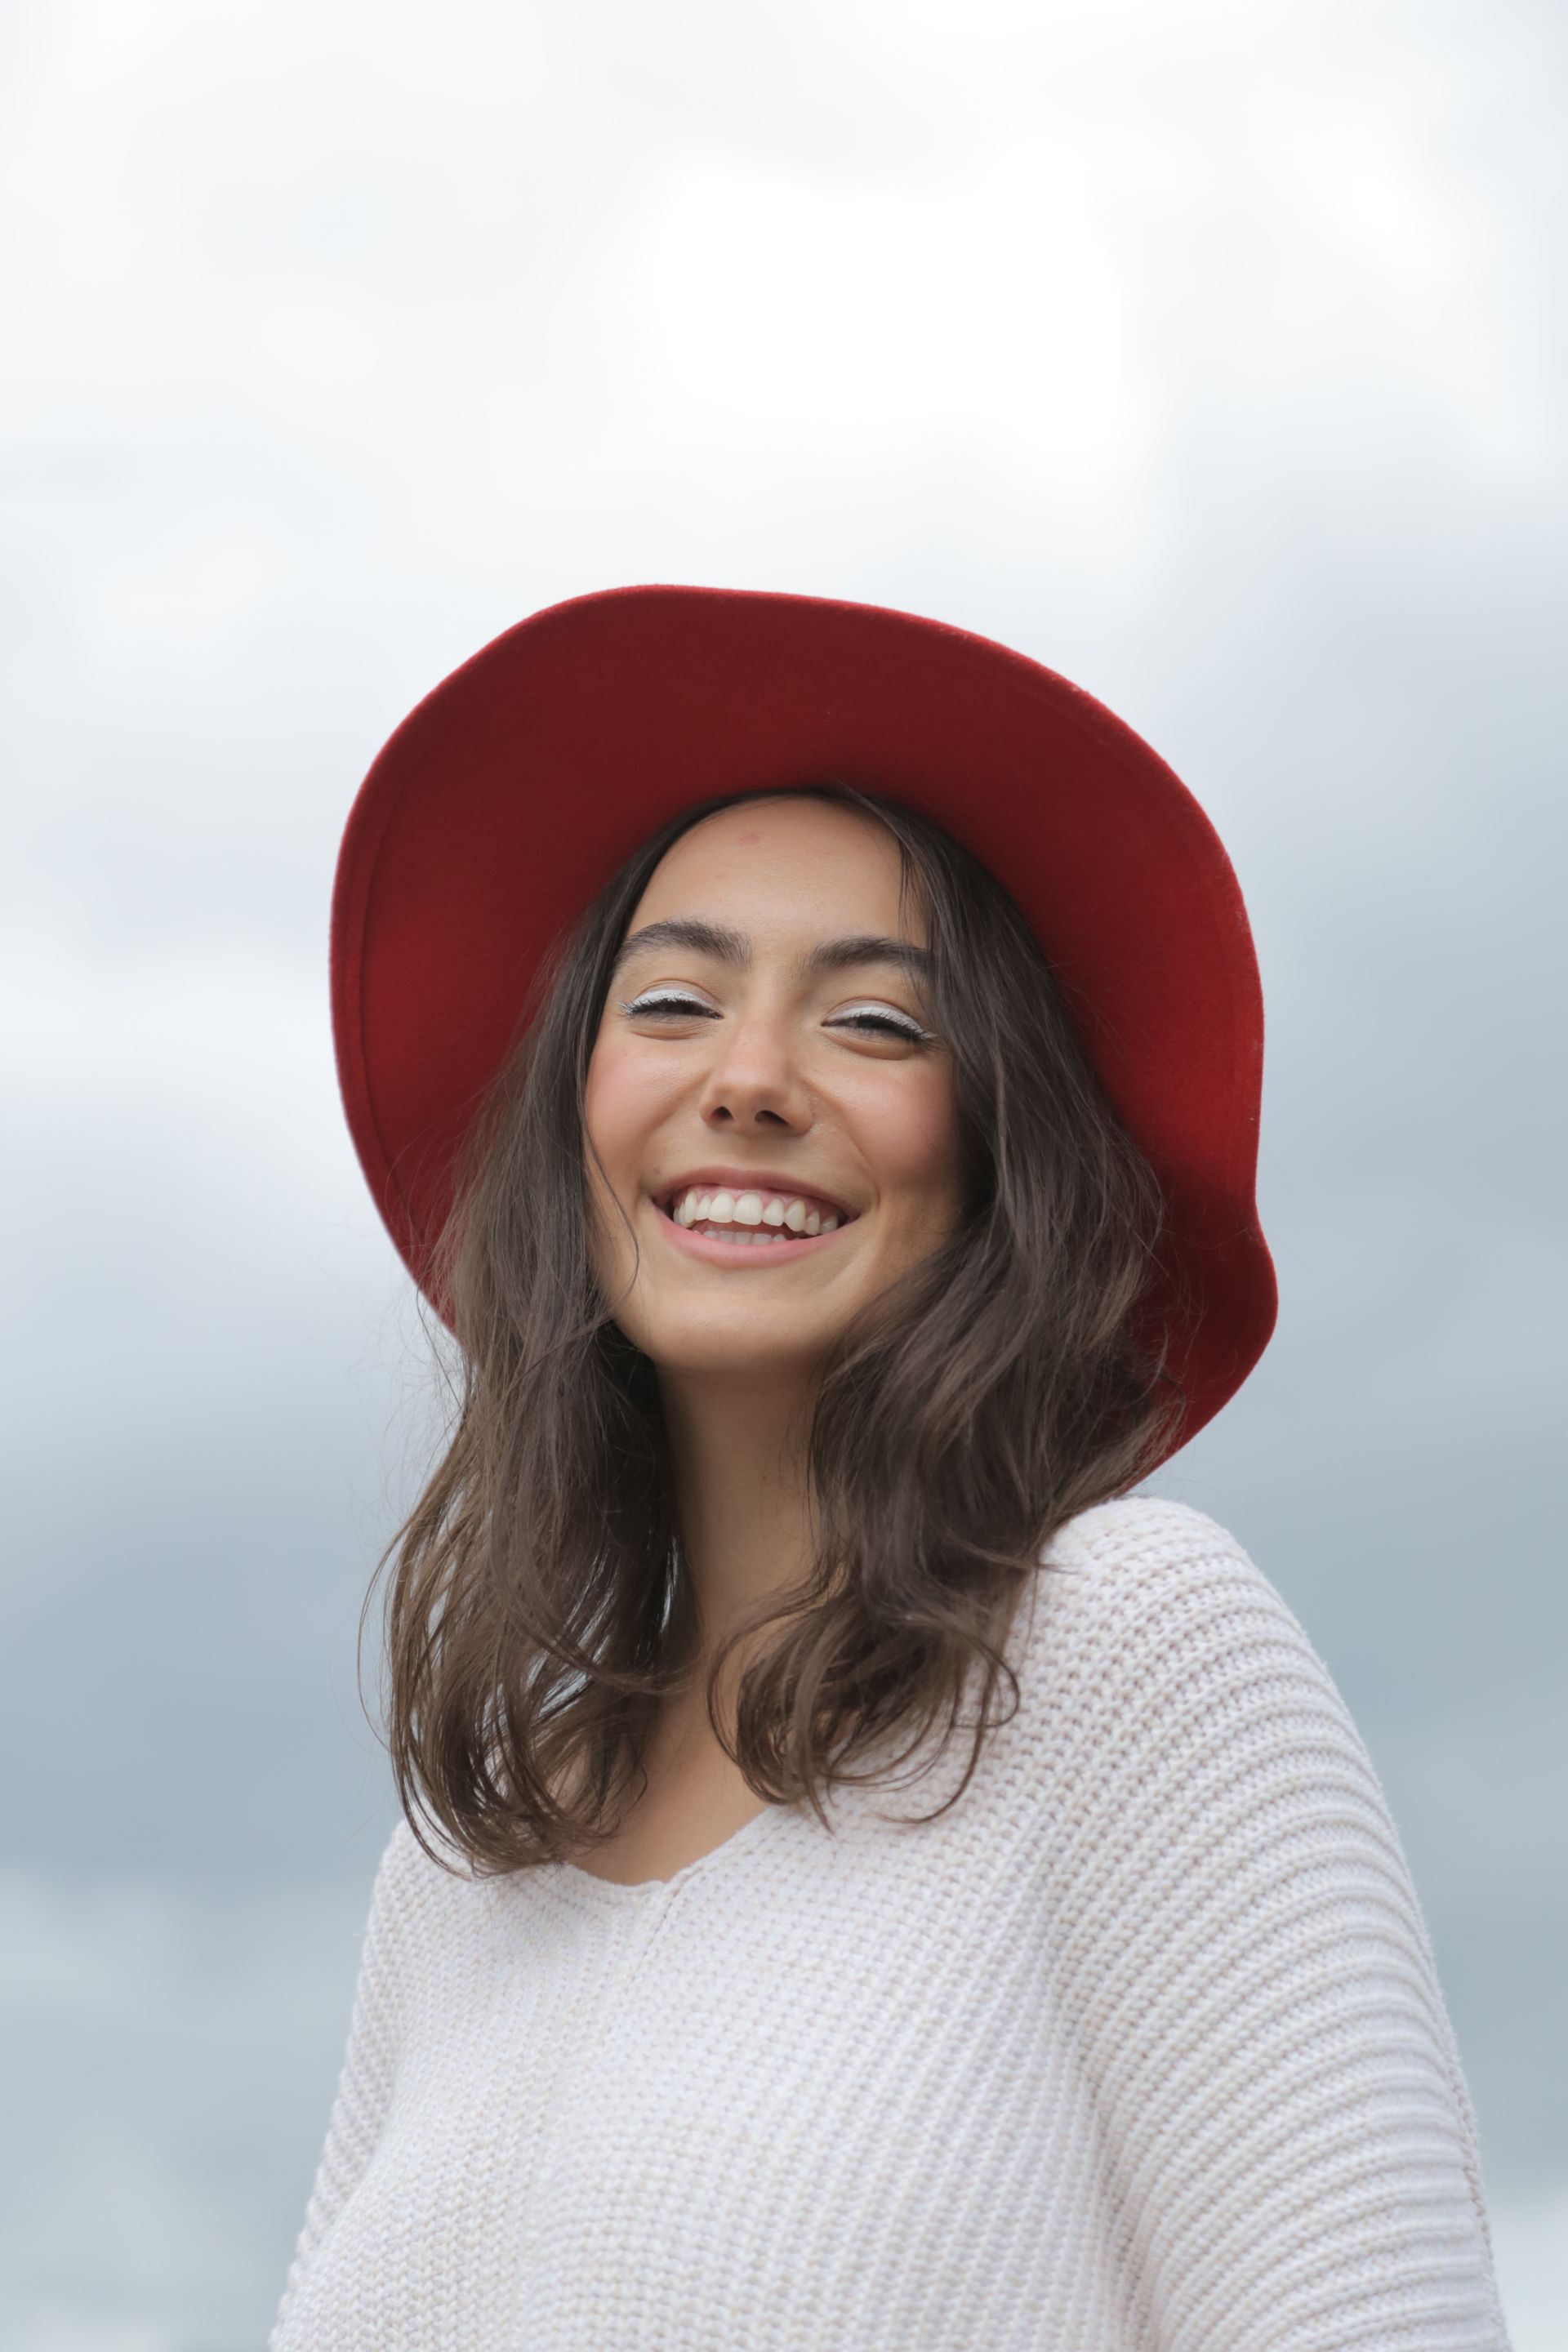 A woman wearing a red hat and a white sweater is smiling.